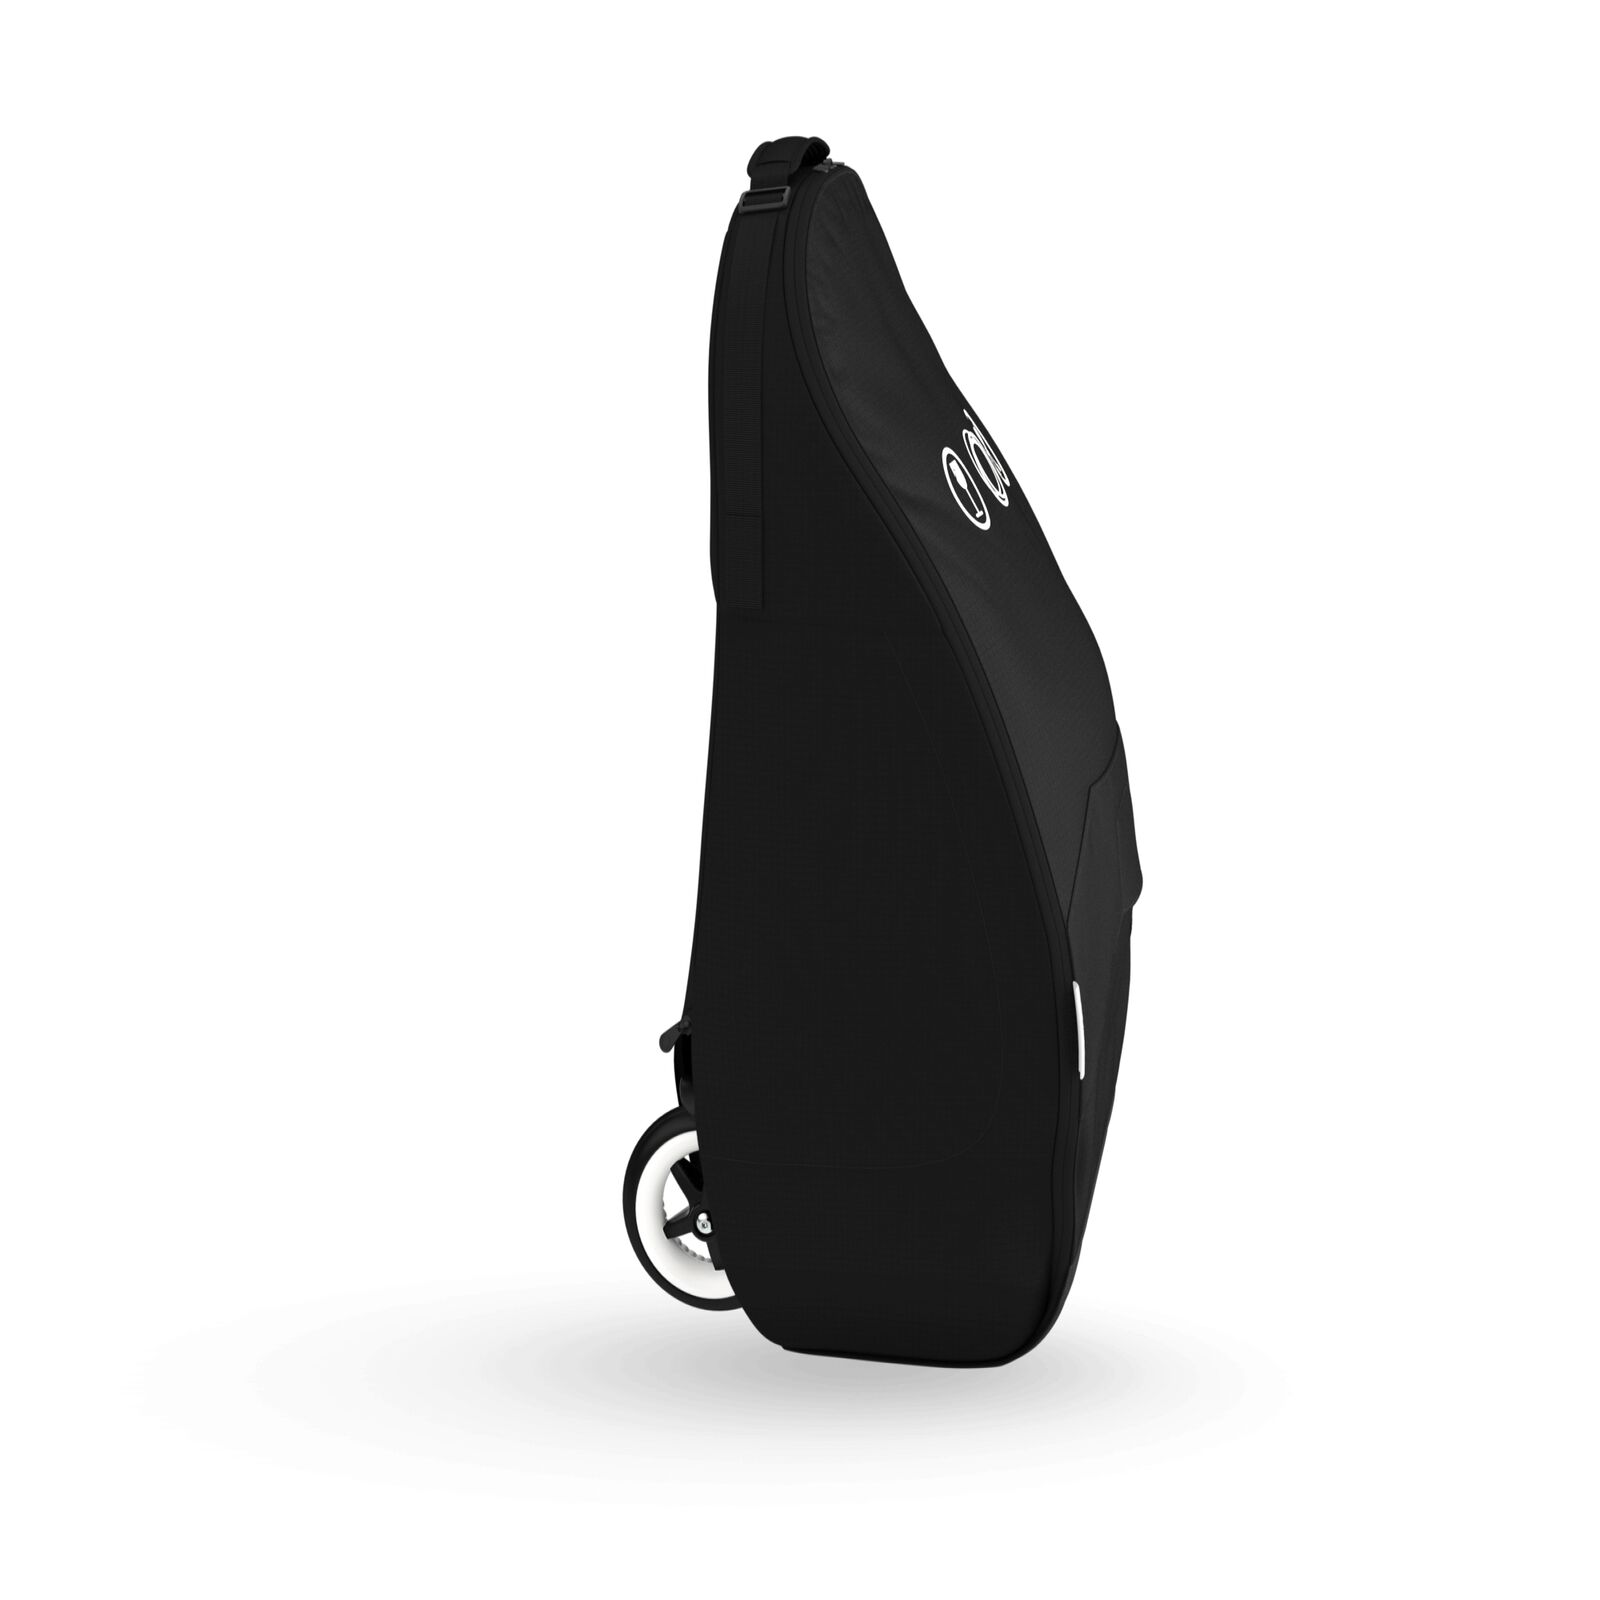 Bugaboo compact transport bag - View 4